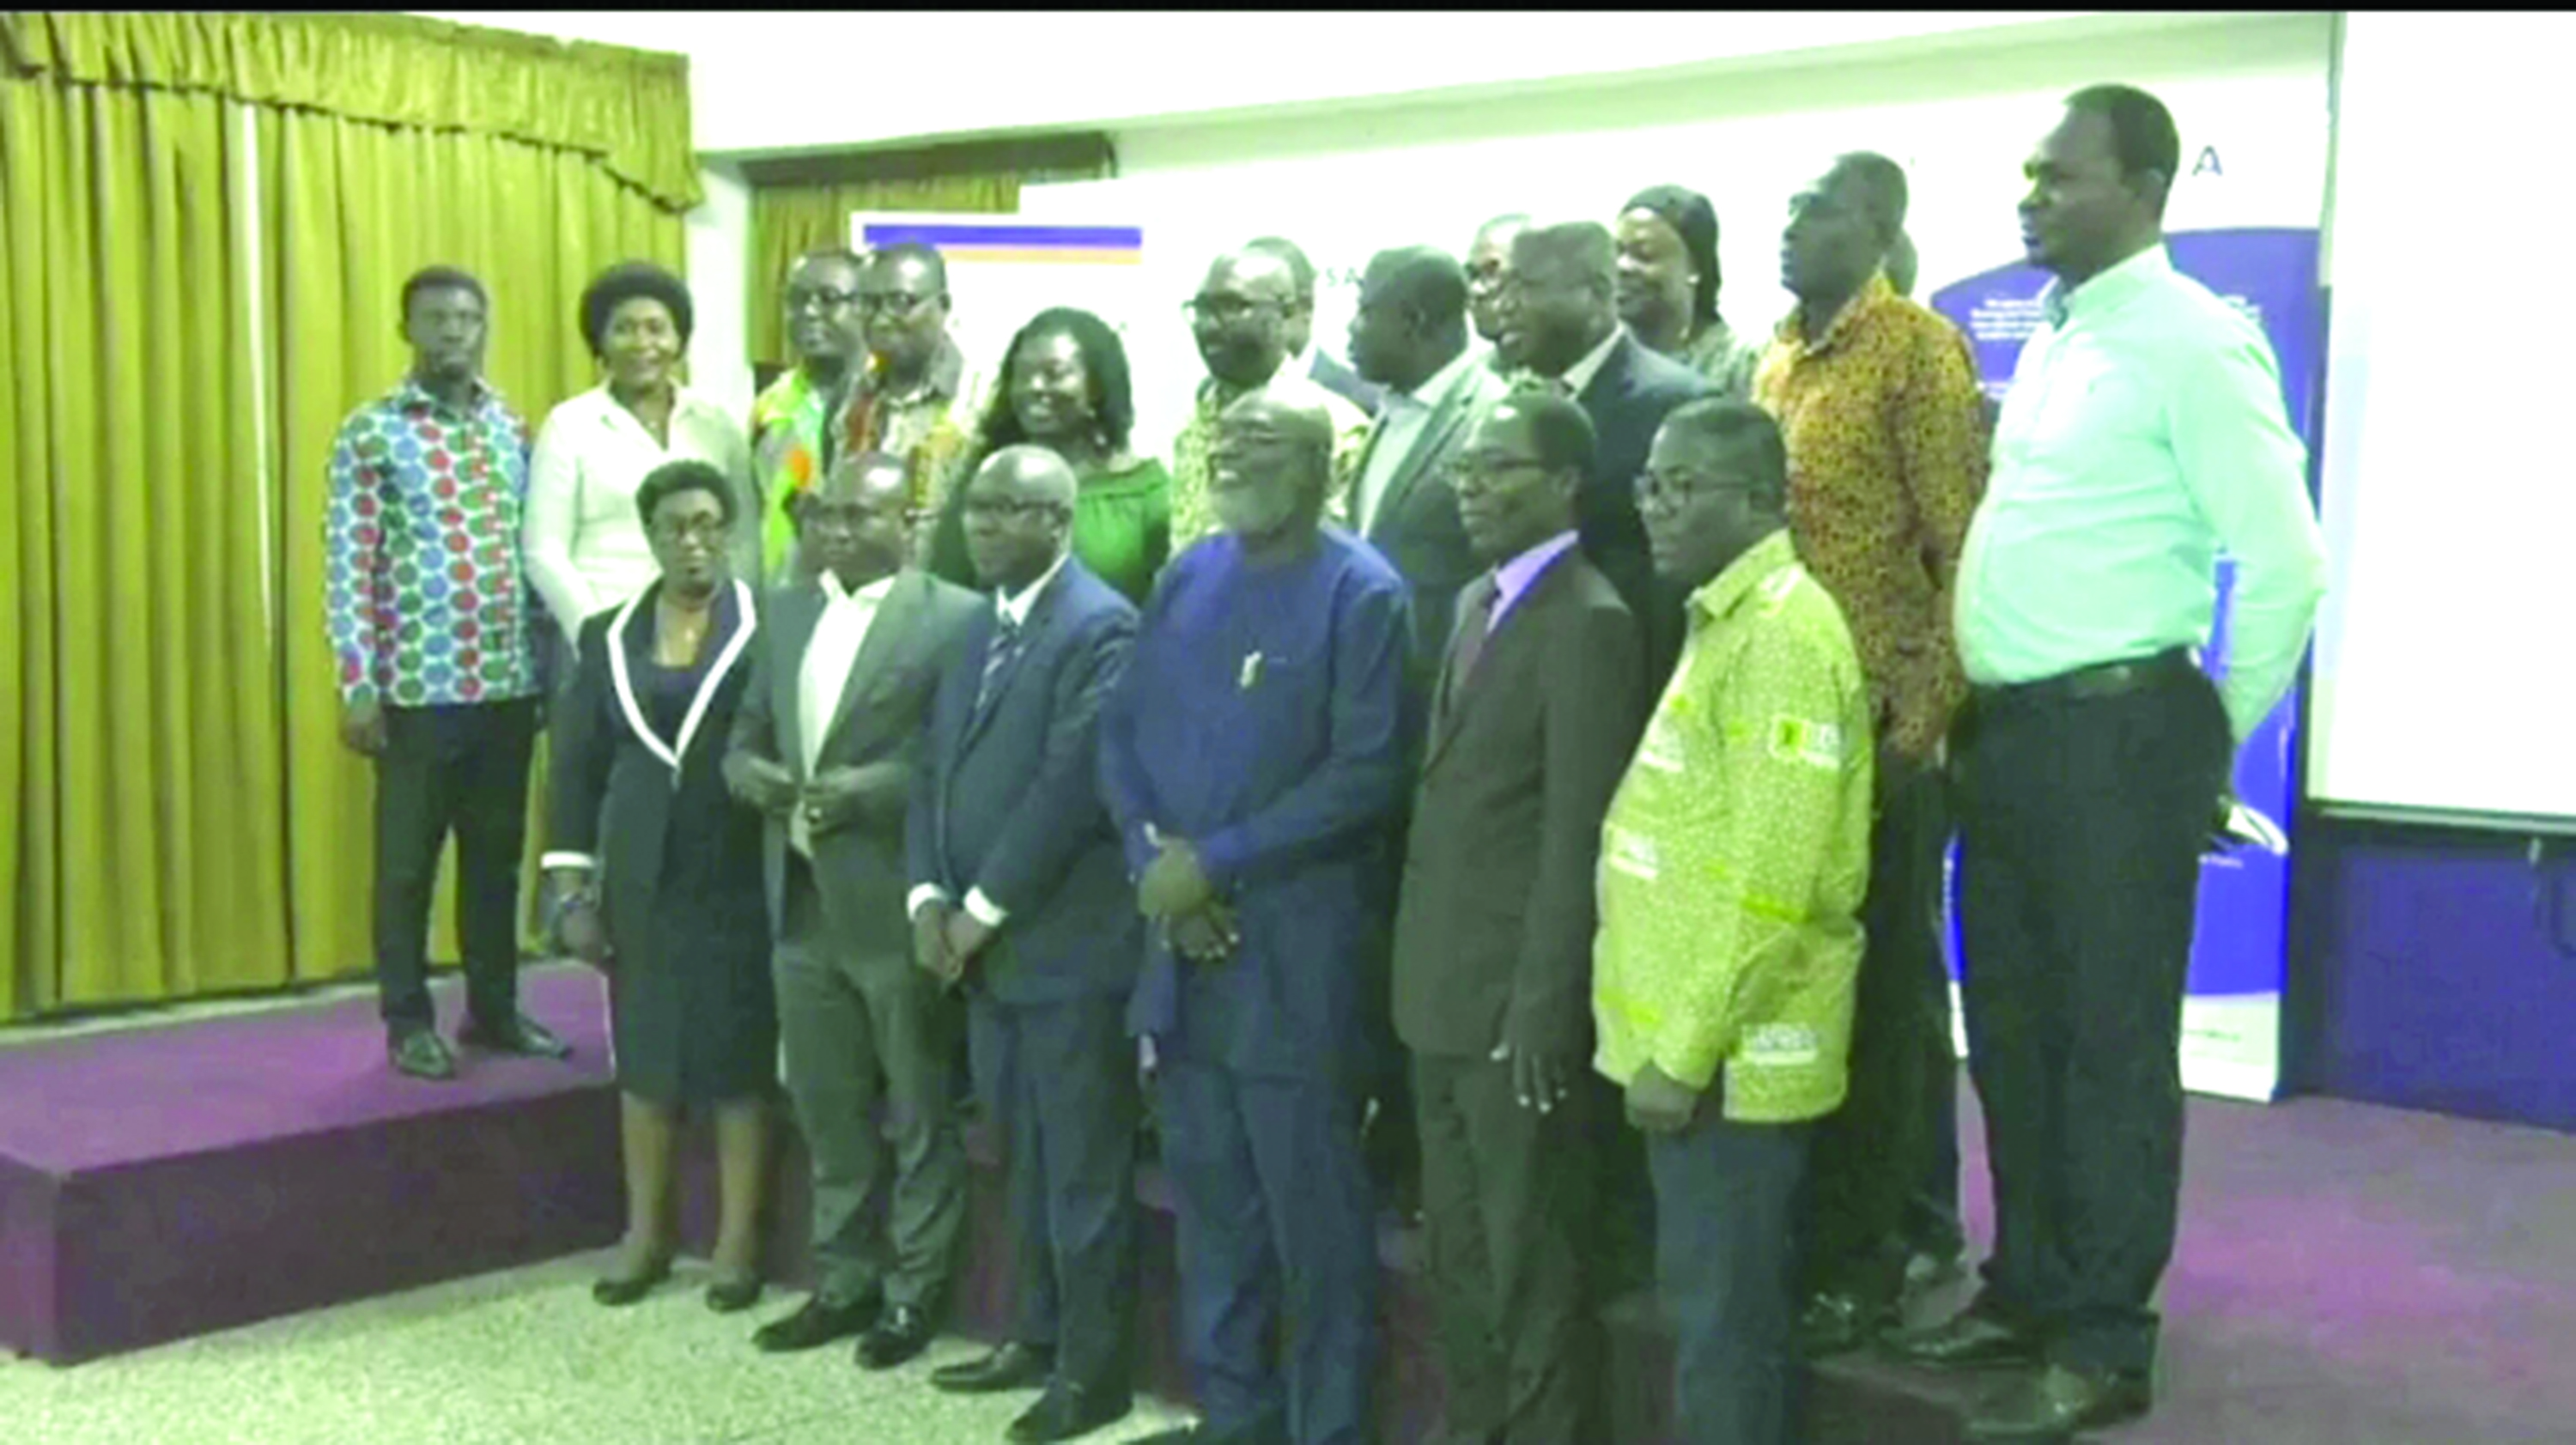 Kwadwo Mpeani Brantuo, (3rd from left) a Chartered Accountant and Senior Partner, Ernst & Young,with some members of the UPSA Global Alumni after the forum